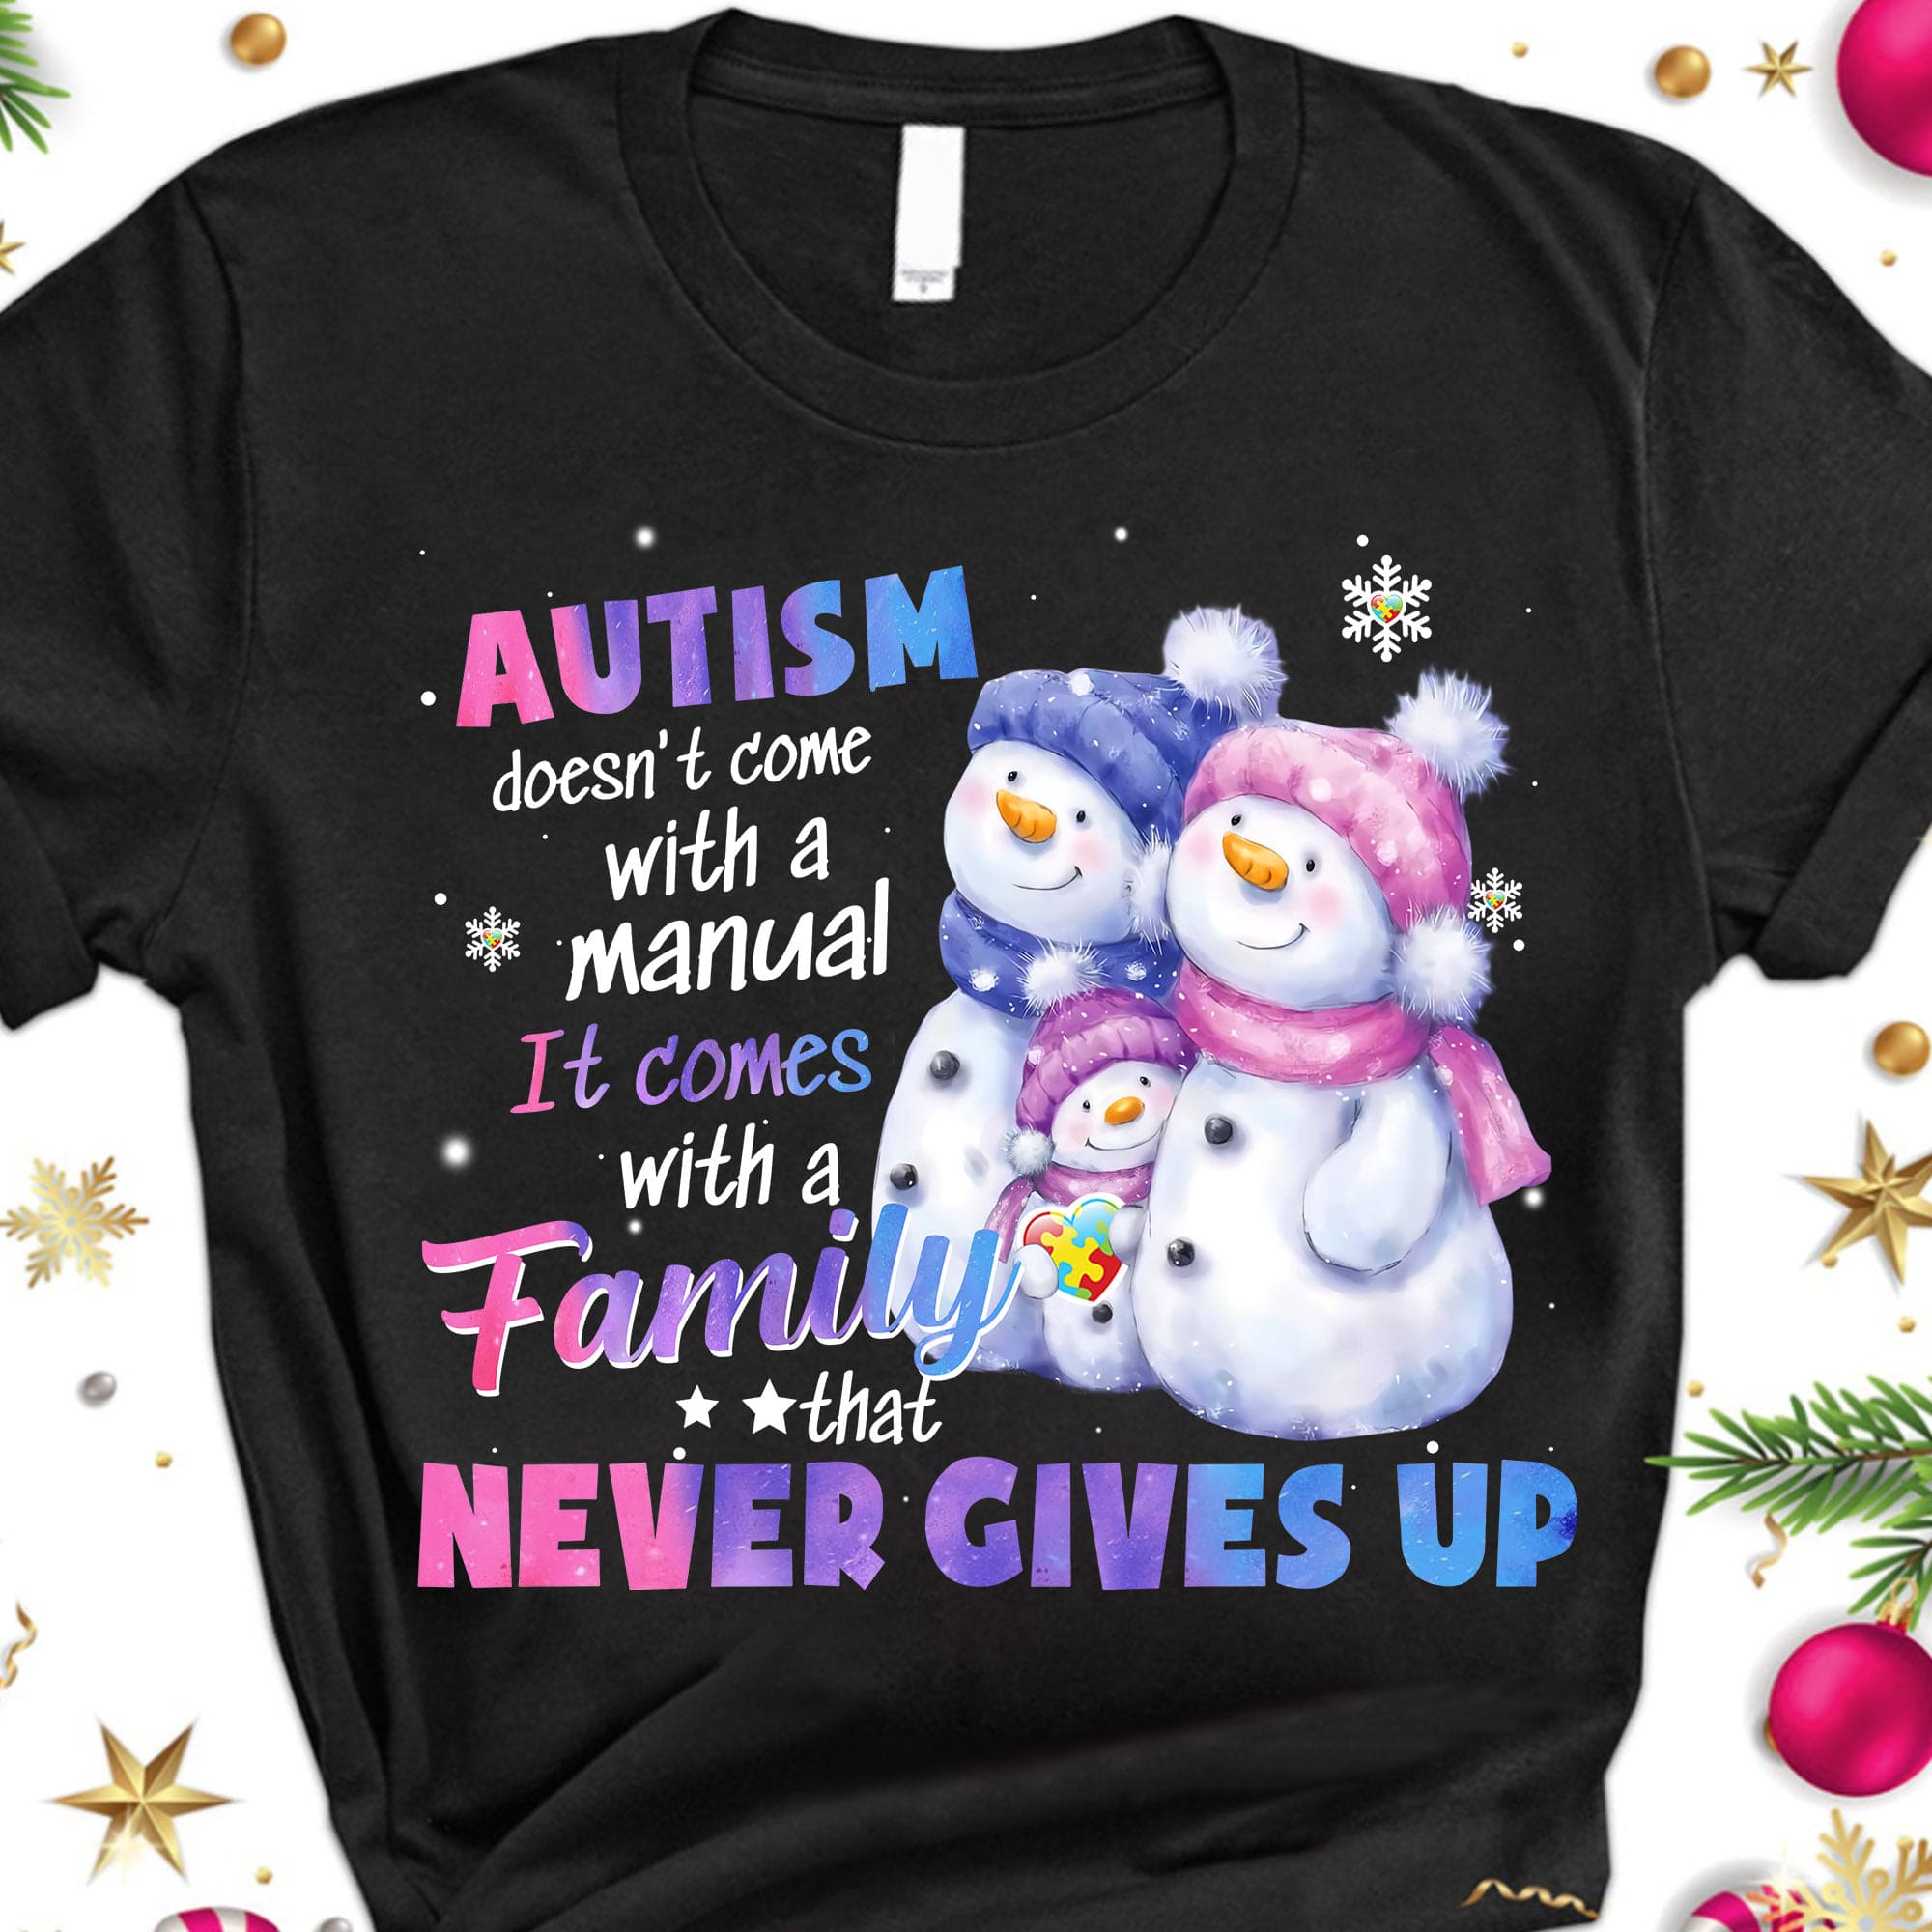 Autism Snowman Family - Autism doesn't come with a manual it comes with a family that never gives up